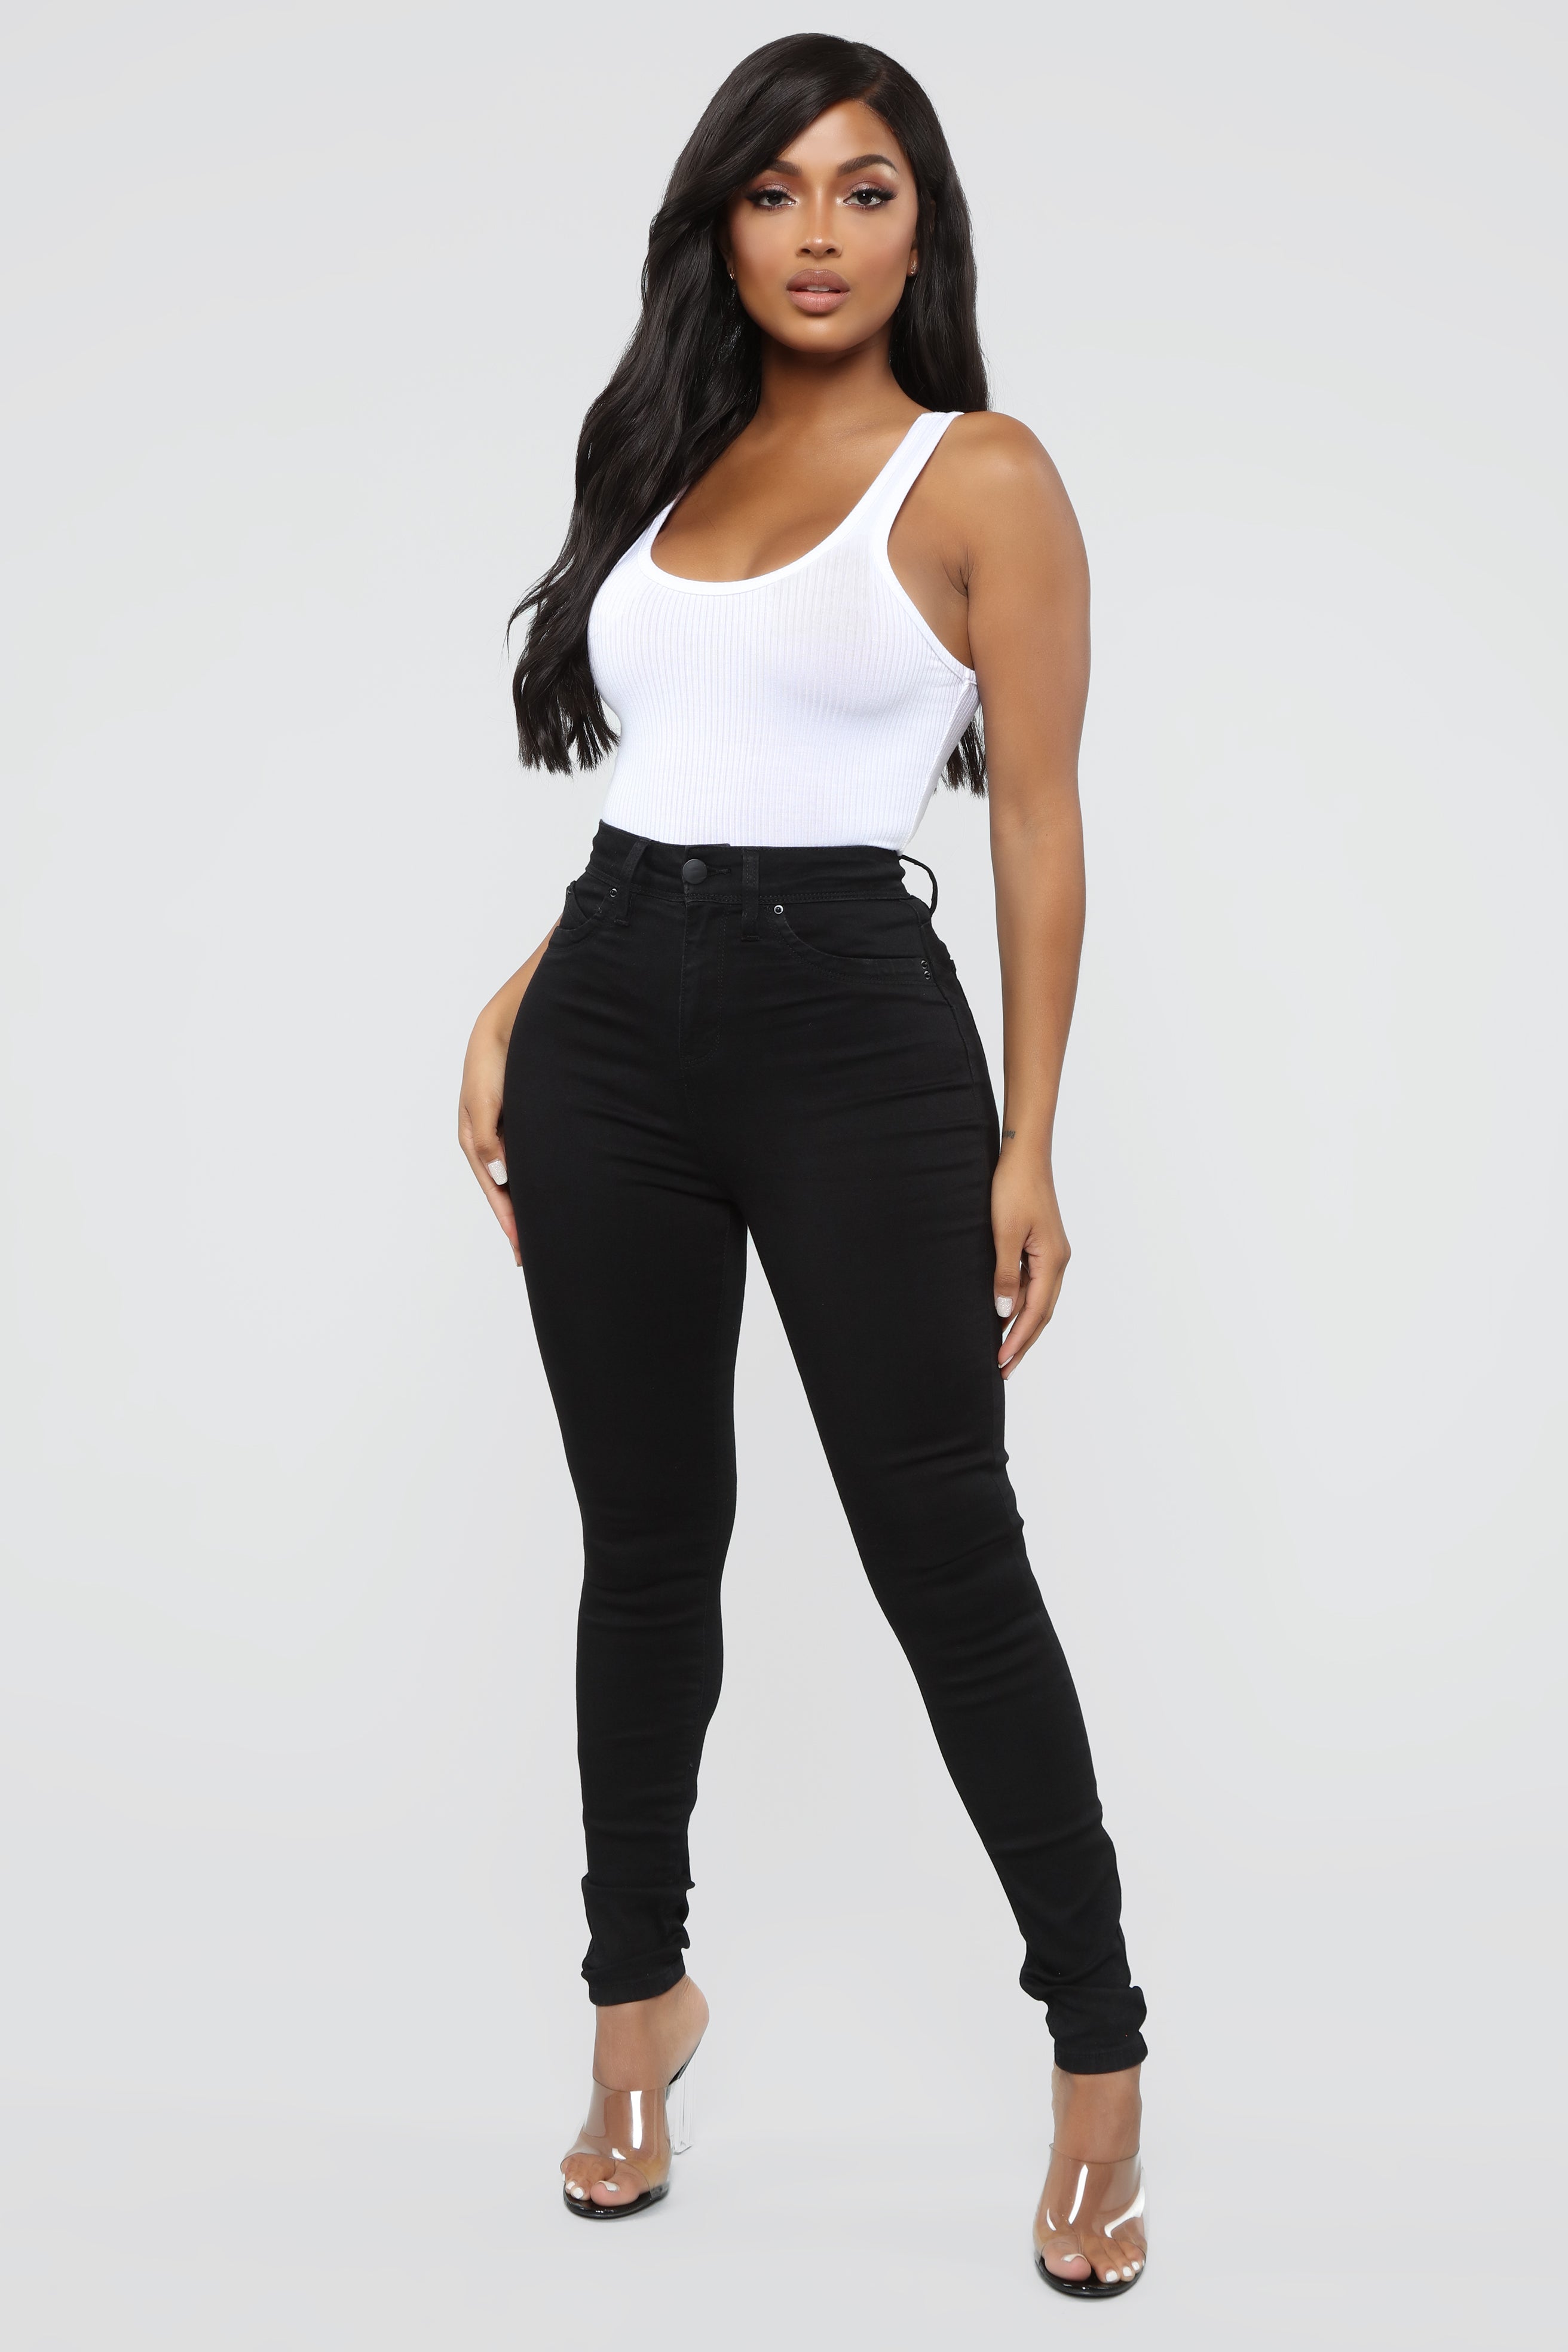 Statuesque Booty Lifting Jeans - Black